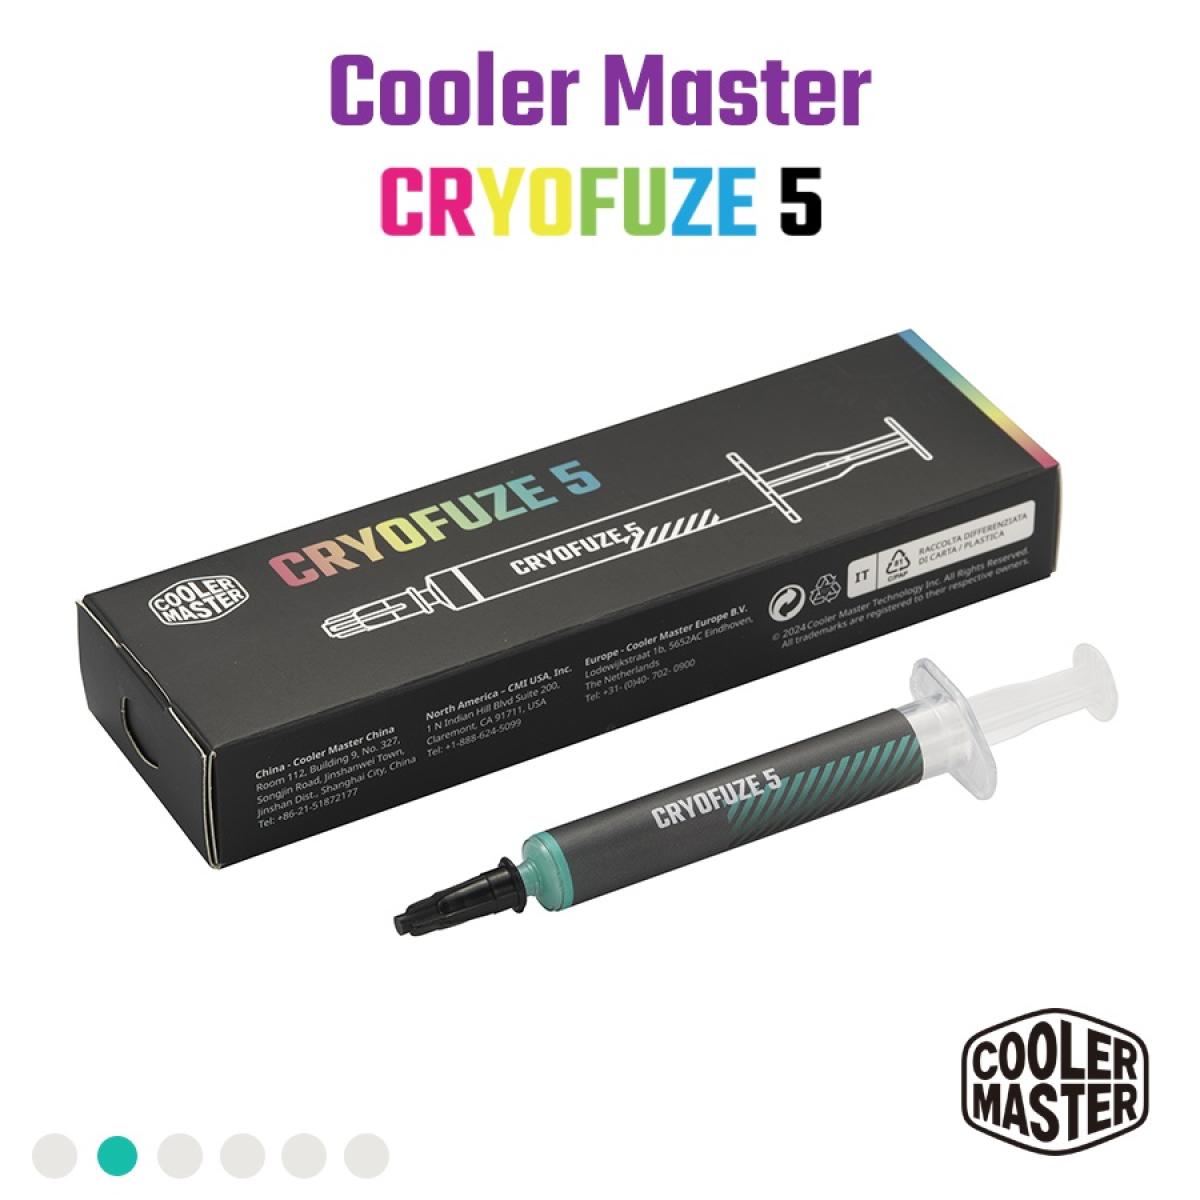 Cooler Master CRYOFUZE 5 (Green) High performance Thermal Paste, 12.6 W/mK High Thermal Conductivity w/ Low Thermal Impedance - 3g Weight